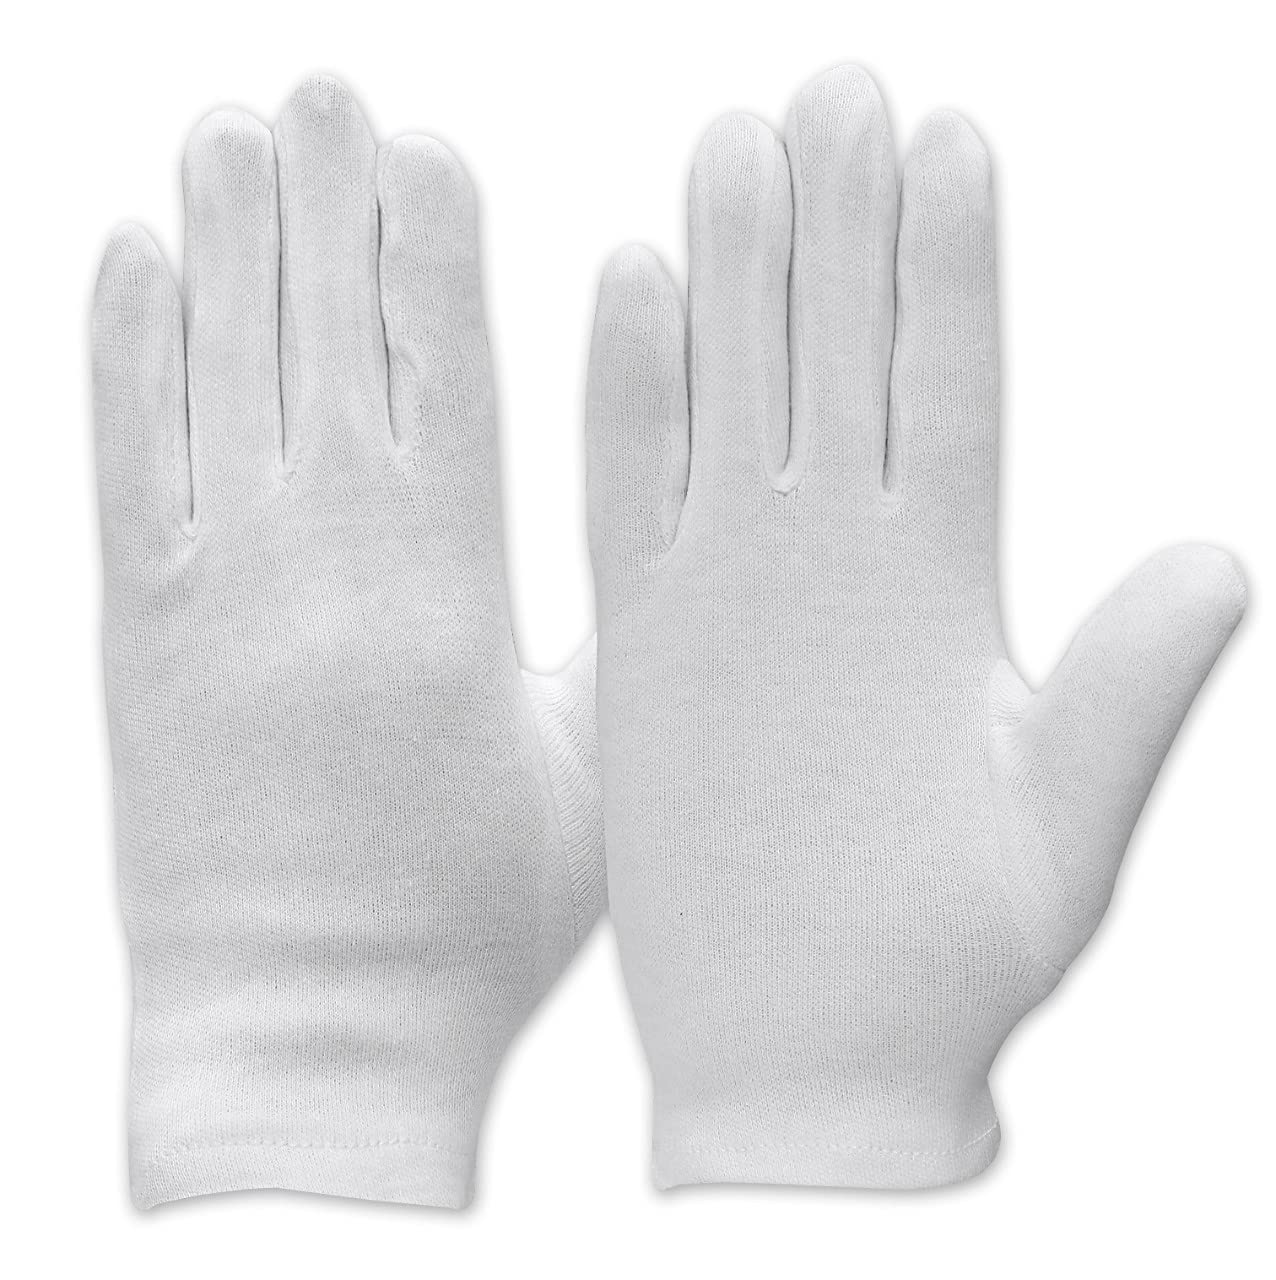 Zeniqe White Cotton Gloves (Large), 12 pair of Premium Quality Soft Moisturizing Gloves, Comfortable and Breathable Work Gloves for Eczema and Dry Hands